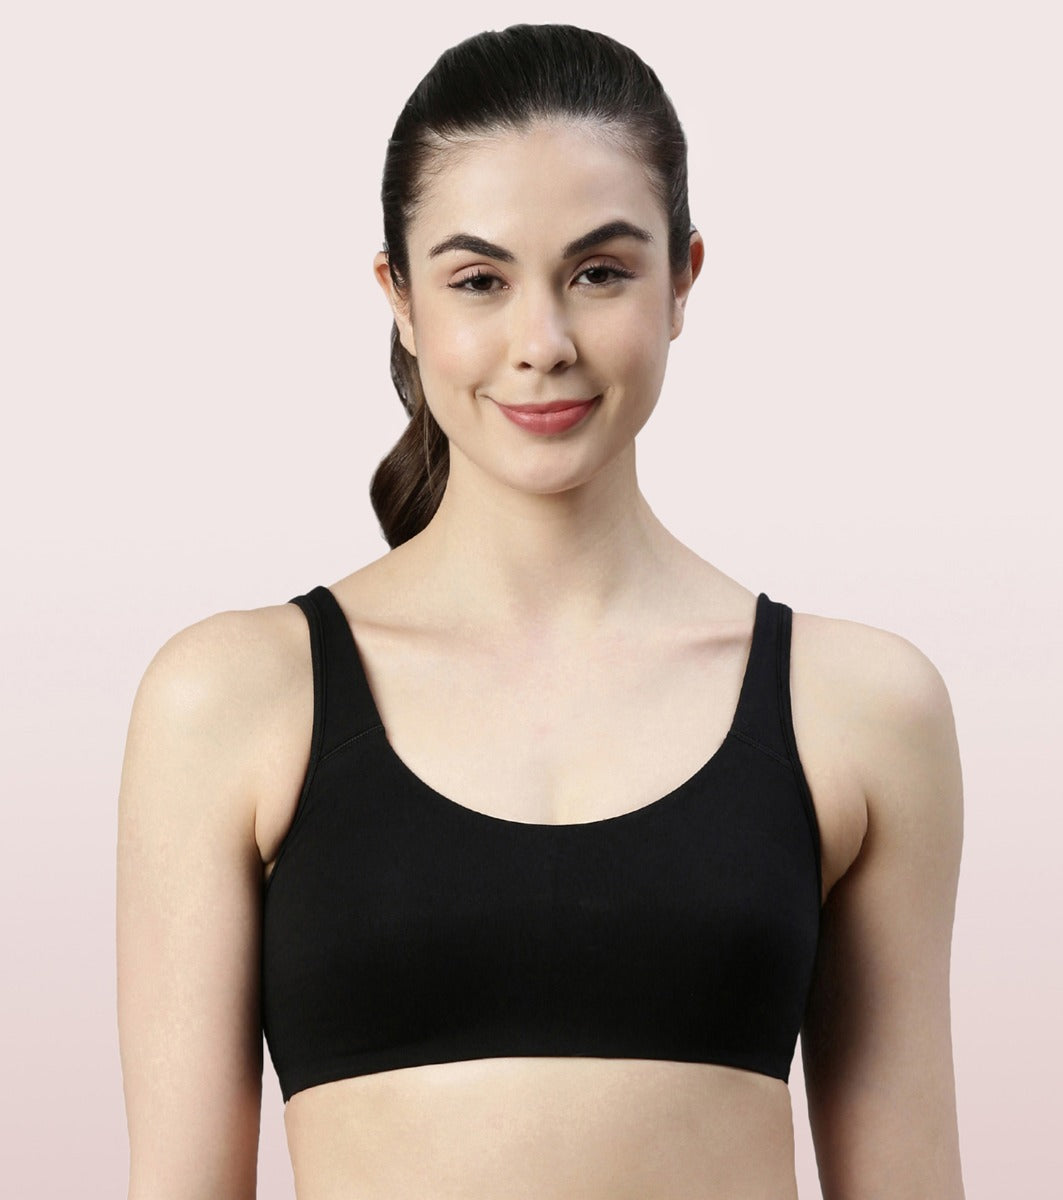 Enamor V058 X-Frame Lift Classic Comfort Bra Stretch Cotton Non-Padded  Wirefree High Coverage in Aurangabad-Maharashtra at best price by Labella  Collection - Justdial